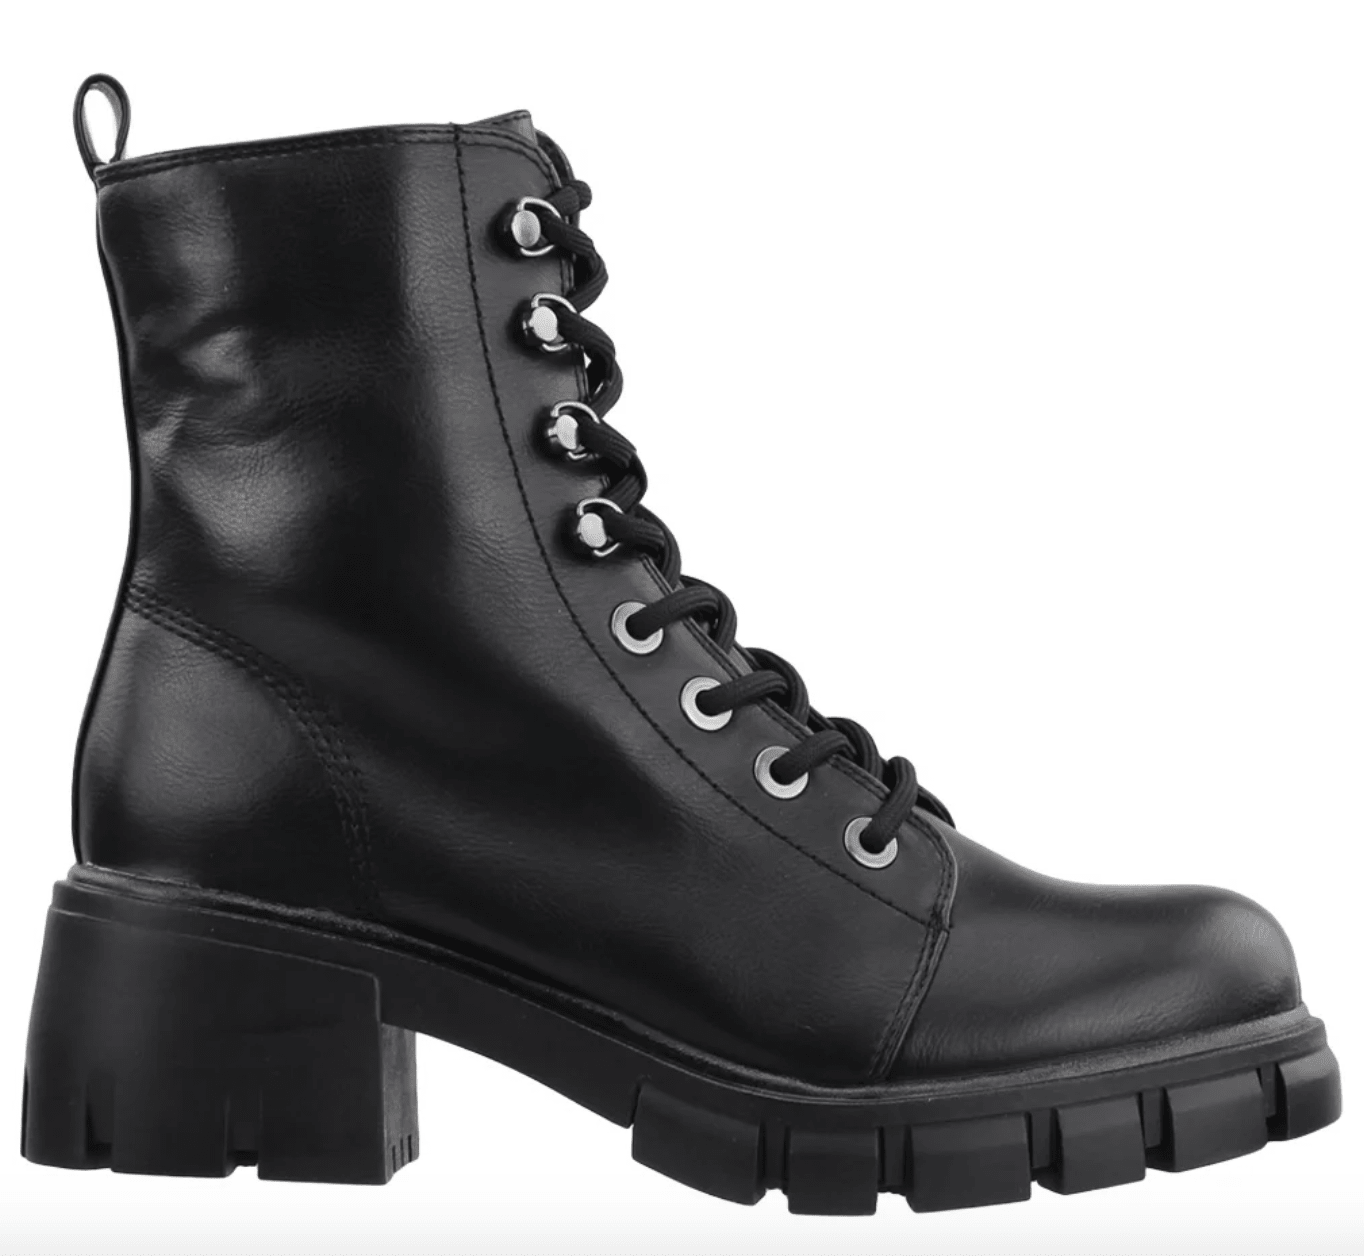 13 Best Black Boots for Women 2021 - Stylish Black Boots to Wear This Season